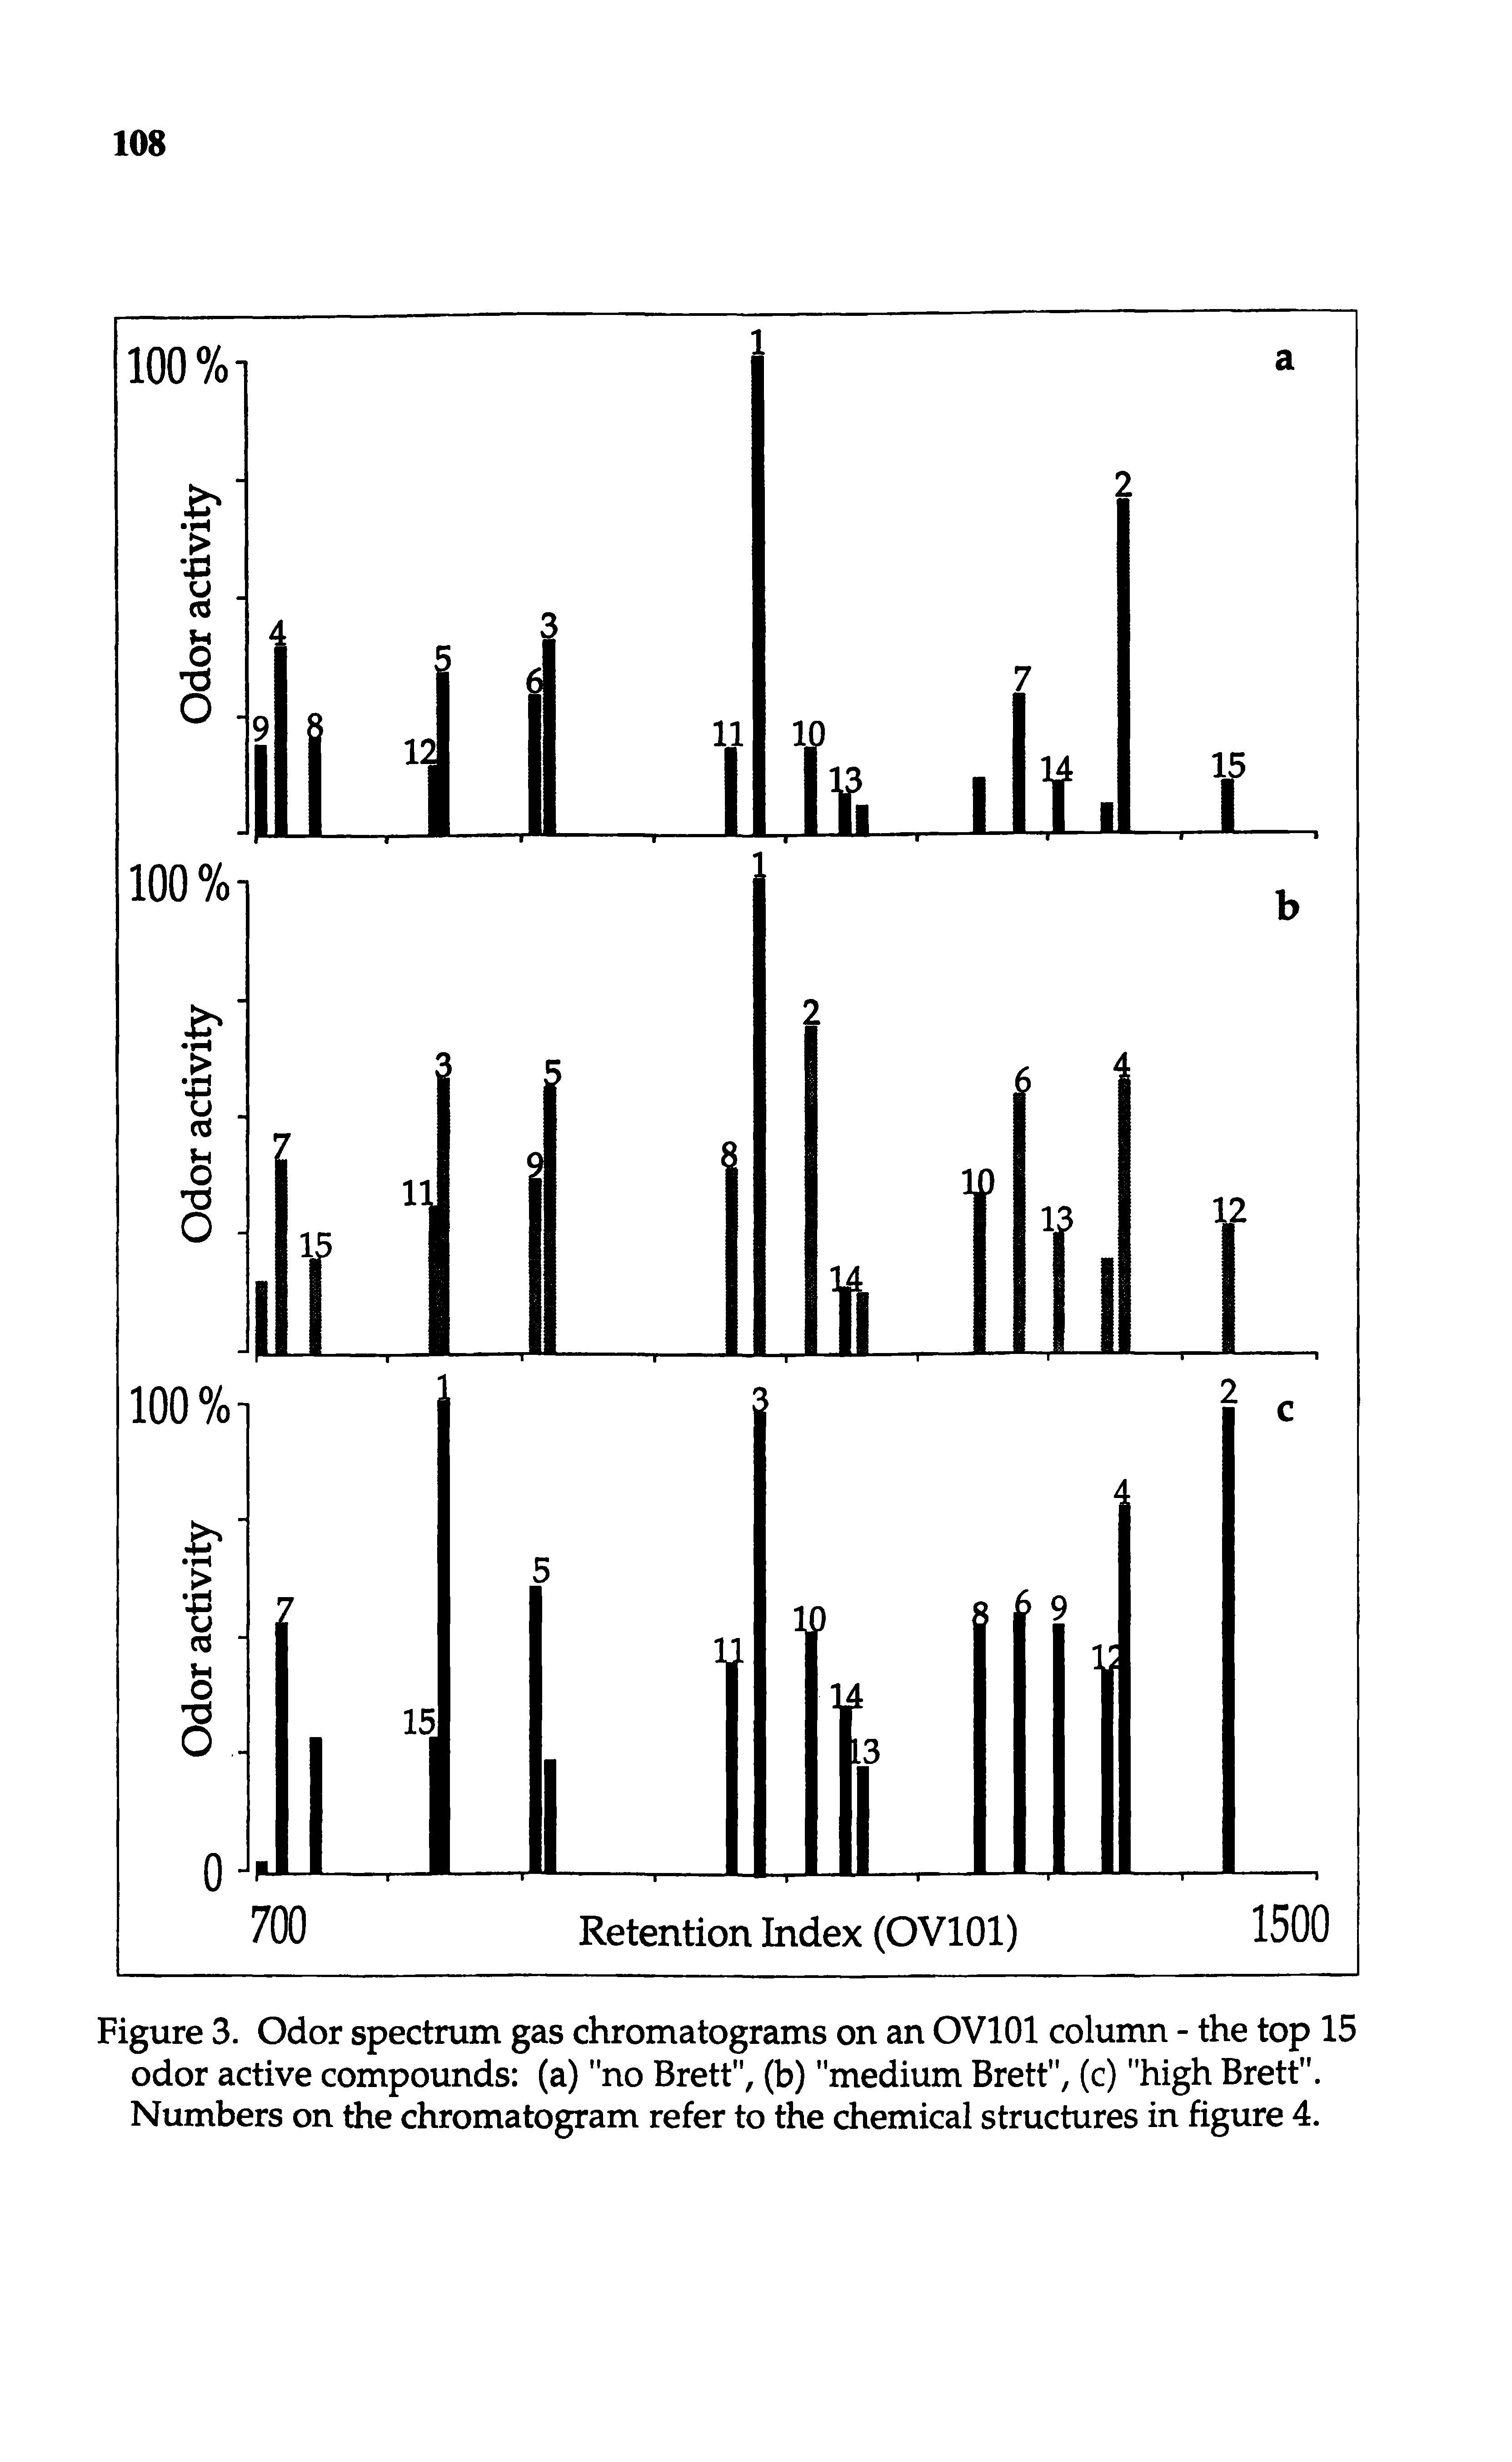 Figure 3. Odor spectrum gas chromatograms on an OVIOI column - the top 15 odor active compounds (a) "no Brett", (b) "medium Brett", (c) "high Brett". Numbers on the chromatogram refer to the chemical structures in figure 4.